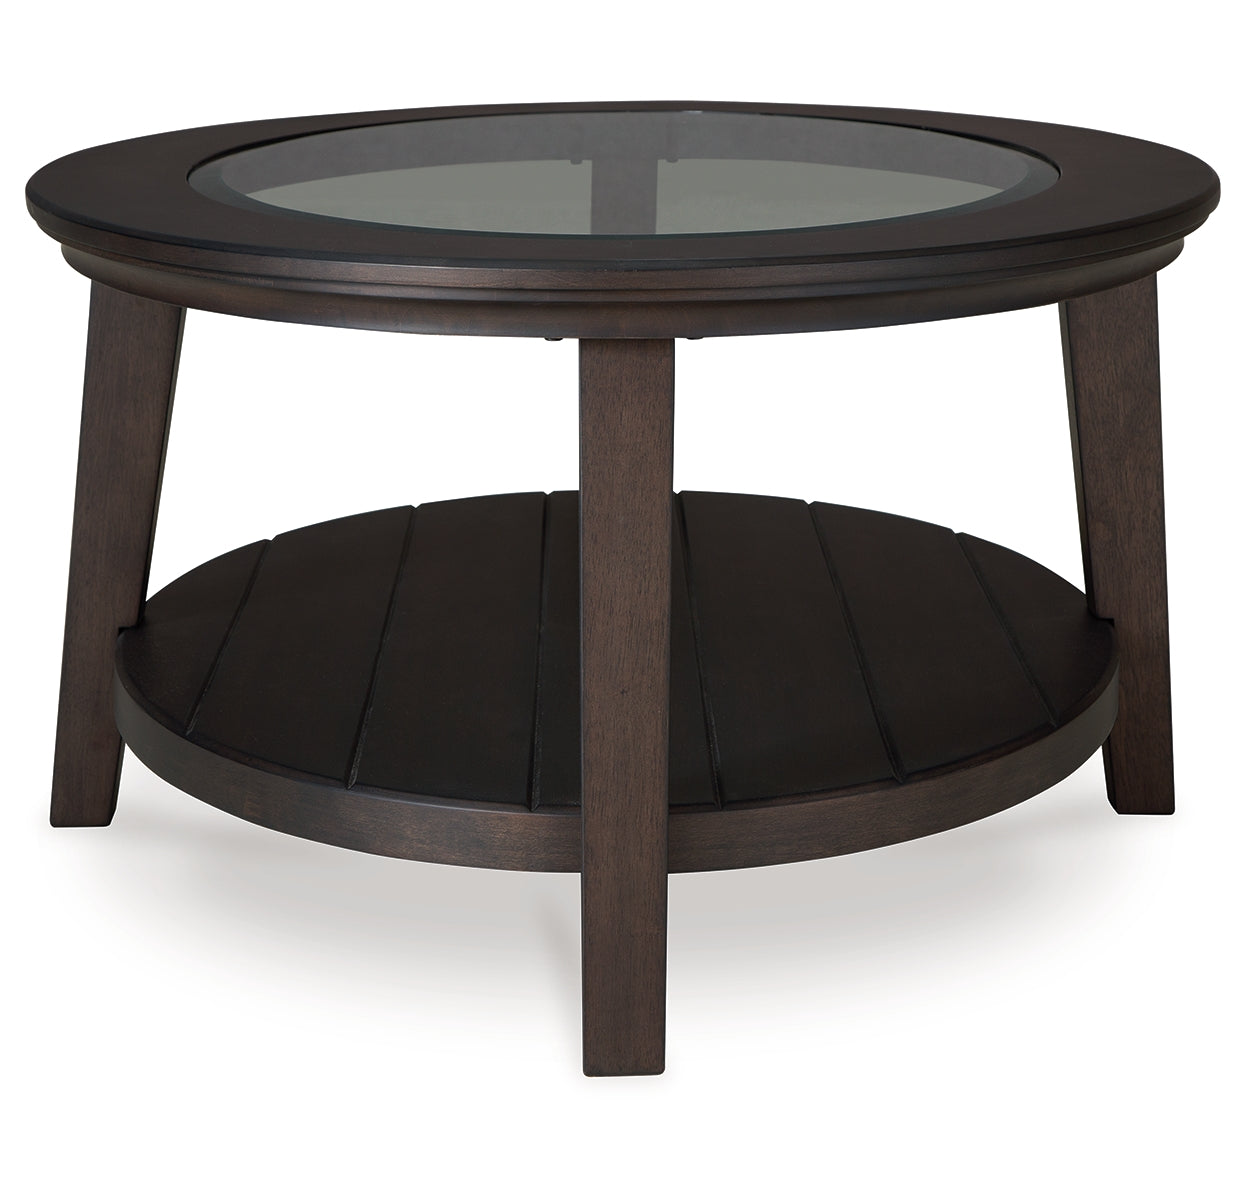 Celamar Coffee Table with 1 End Table